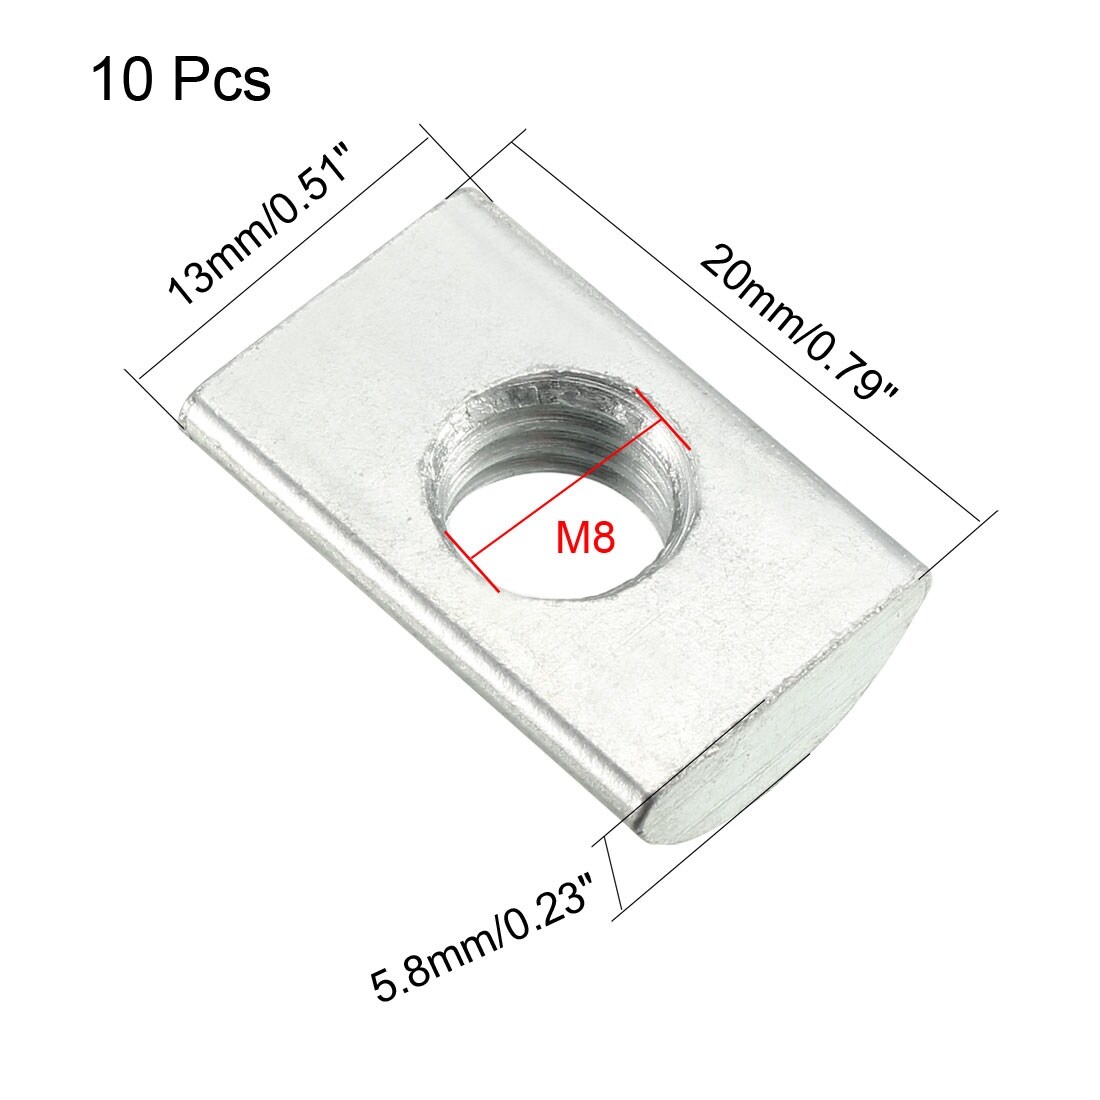 uxcell 12pcs M8 45 Series Metal Half Round Roll in T-slot Spring Nut w Ball a15090400ux0603 